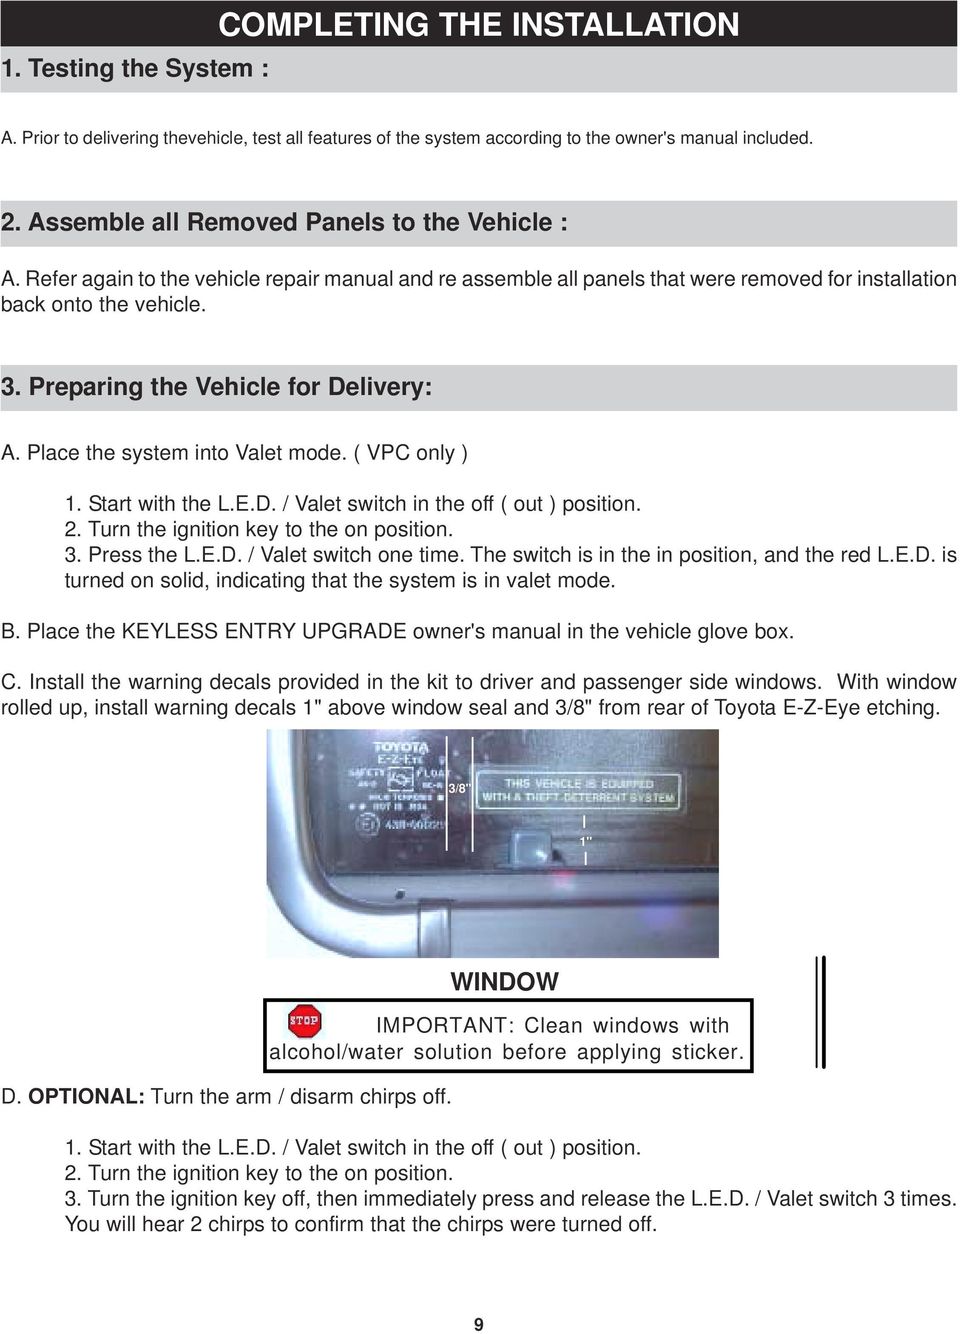 Preparing the Vehicle for Delivery: A. Place the system into Valet mode. ( VPC only ) 1. Start with the L.E.D. / Valet switch in the off ( out ) position. 2. Turn the ignition key to the on position.